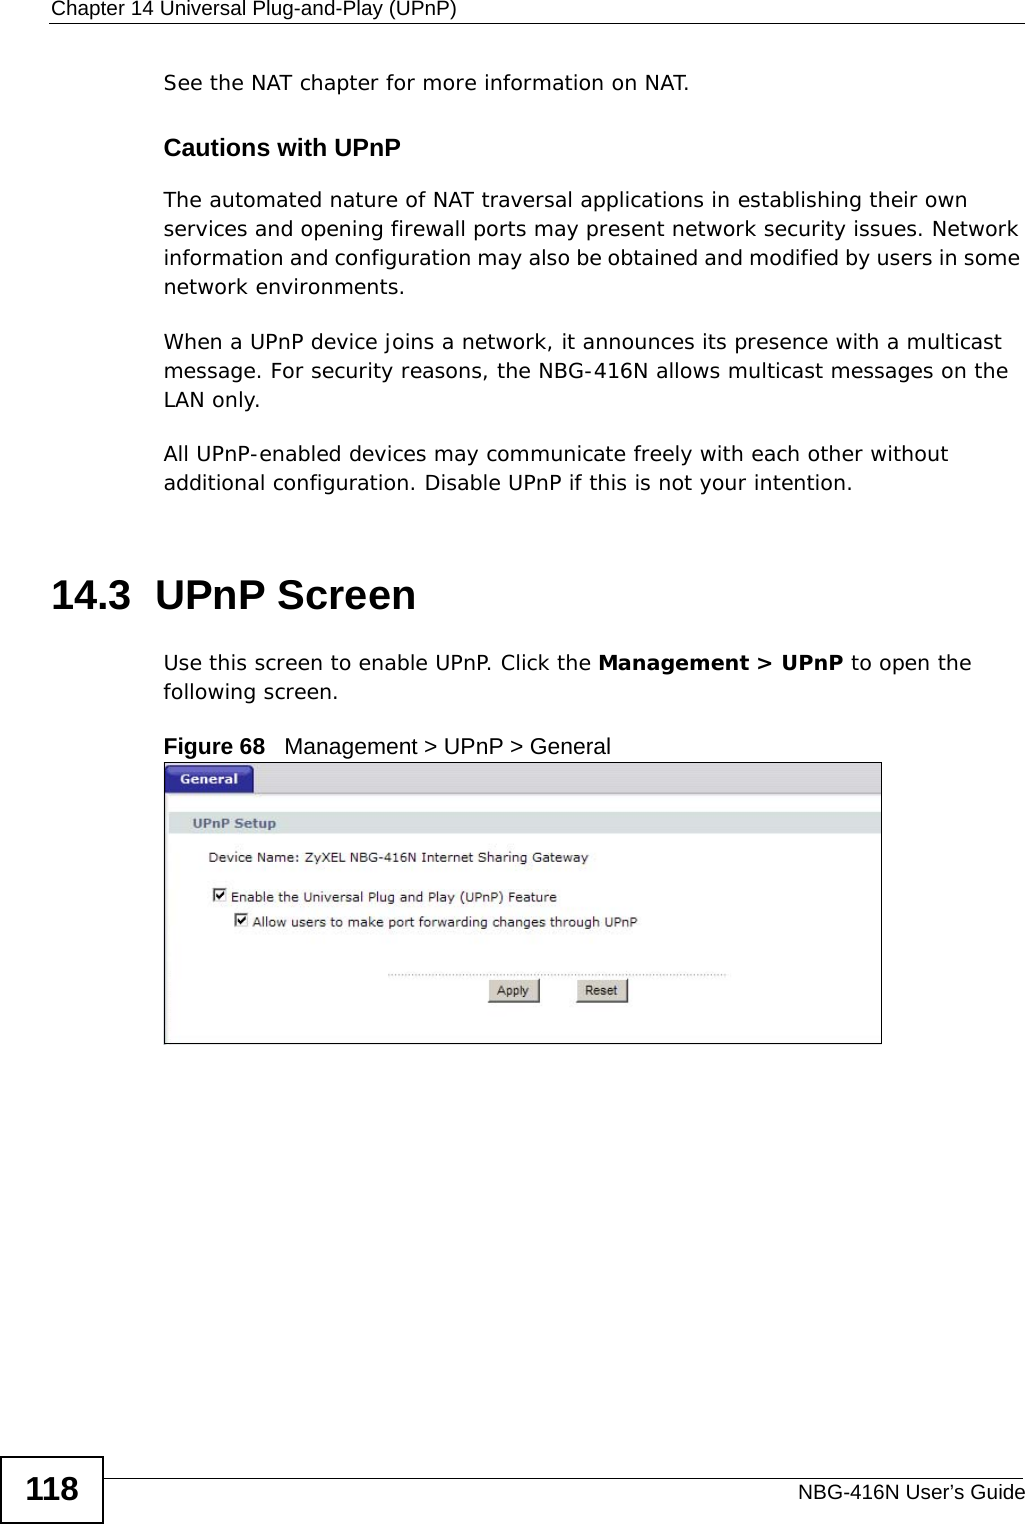 Chapter 14 Universal Plug-and-Play (UPnP)NBG-416N User’s Guide118See the NAT chapter for more information on NAT.Cautions with UPnPThe automated nature of NAT traversal applications in establishing their own services and opening firewall ports may present network security issues. Network information and configuration may also be obtained and modified by users in some network environments. When a UPnP device joins a network, it announces its presence with a multicast message. For security reasons, the NBG-416N allows multicast messages on the LAN only.All UPnP-enabled devices may communicate freely with each other without additional configuration. Disable UPnP if this is not your intention. 14.3  UPnP ScreenUse this screen to enable UPnP. Click the Management &gt; UPnP to open the following screen.Figure 68   Management &gt; UPnP &gt; General 